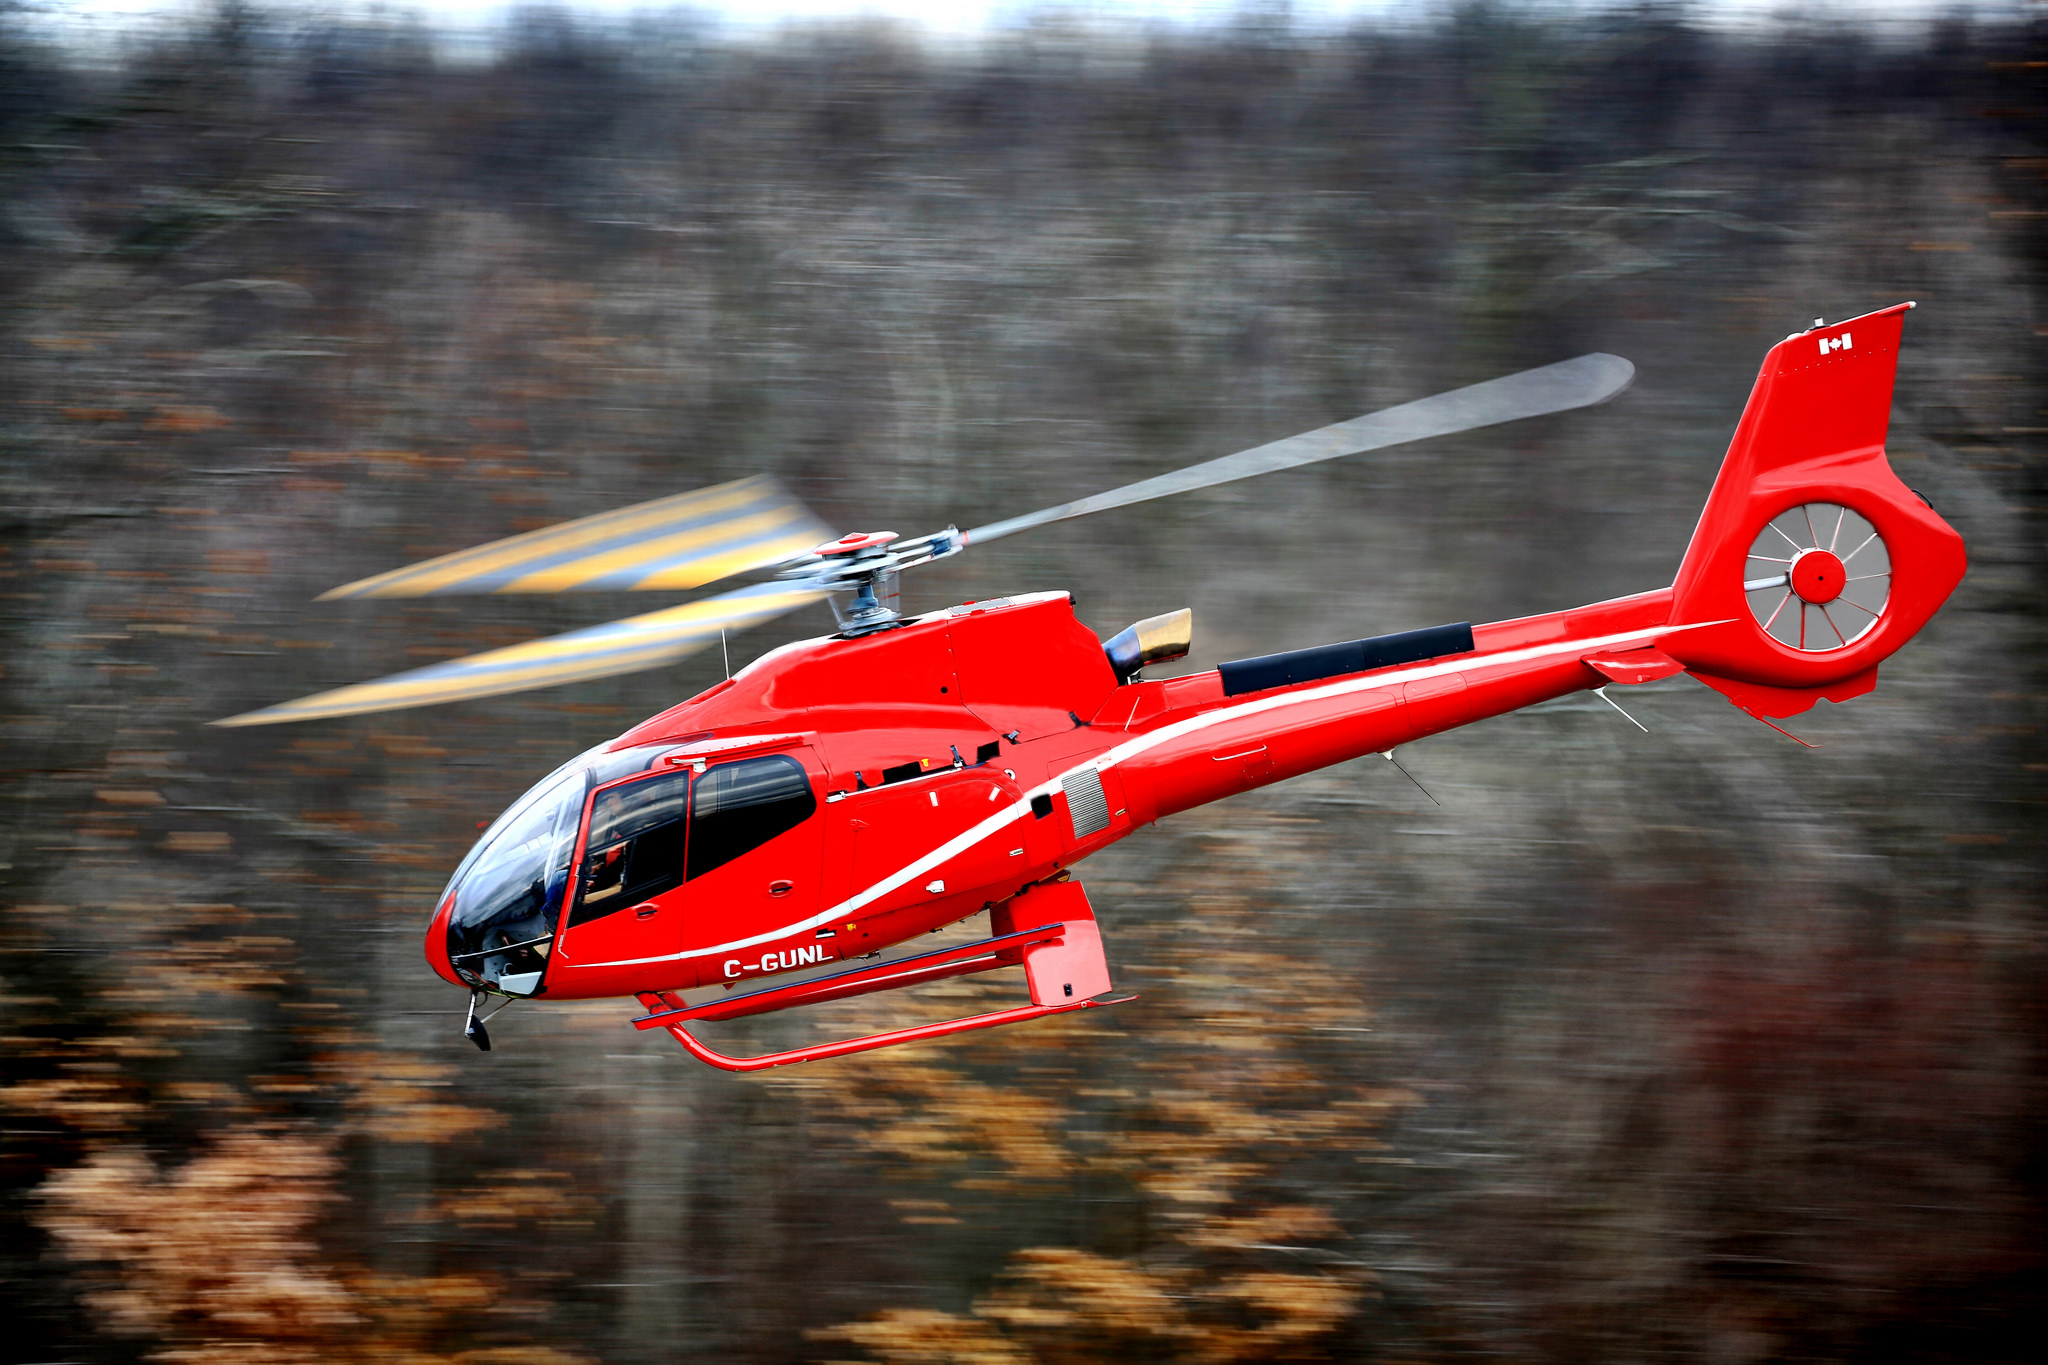 ec 130, miscellanea, miscellaneous, blur, smooth, flight, helicopter, eurocopter, single engine, airbus helicopters